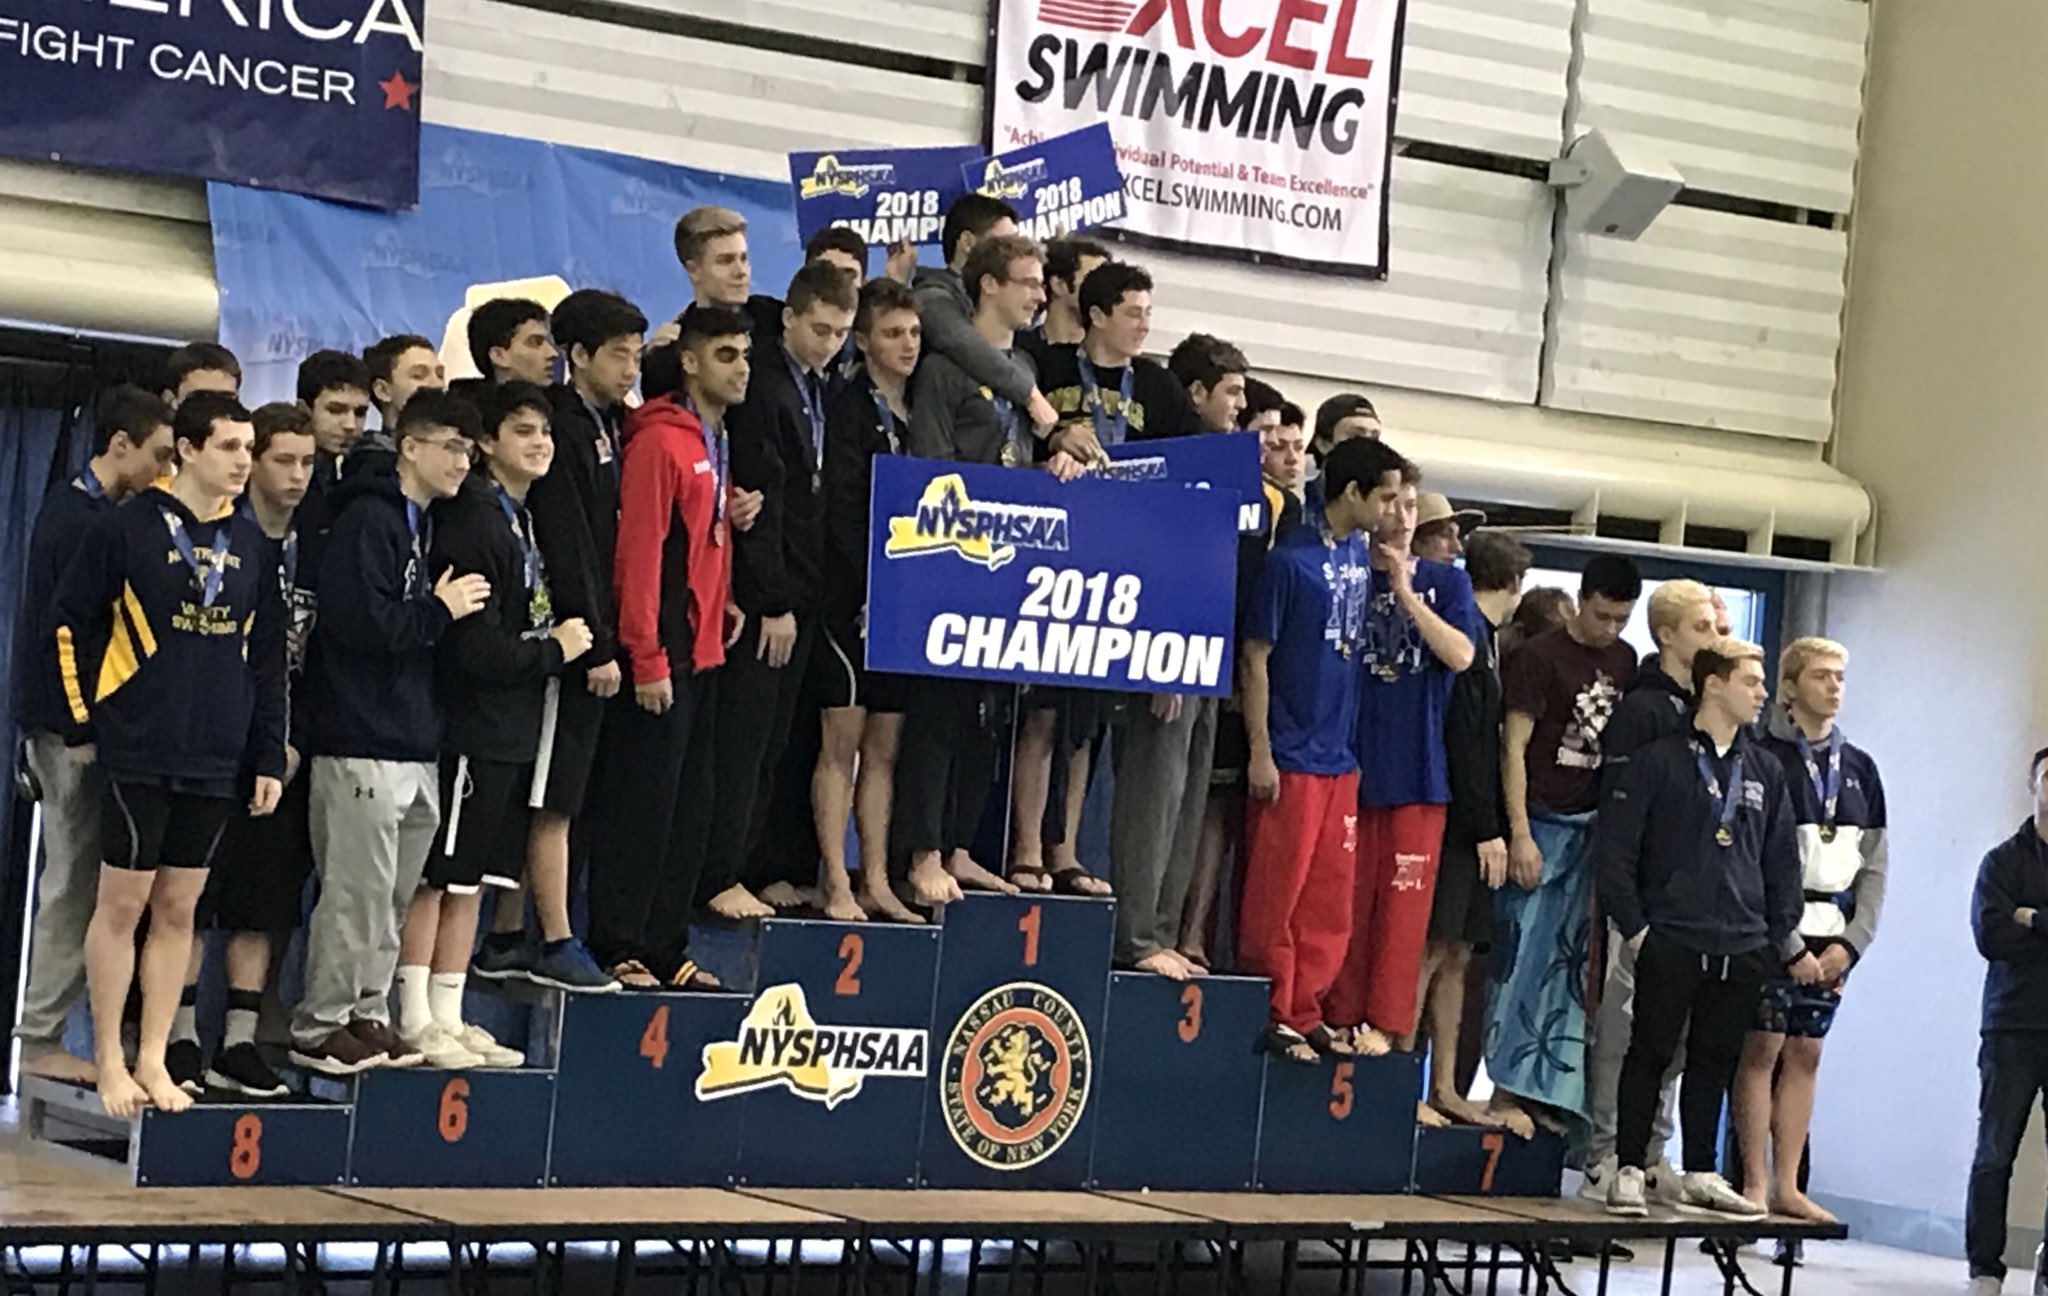   The Half Hollow Hills 200-yard medley relay team of Mason Arnberg, Dylan Chan, Kabir Randhawa and Ethan Tack stand in the fourth-place slot of the podium at the state championships last weekend.  &nbsp; Photo/Twitter  